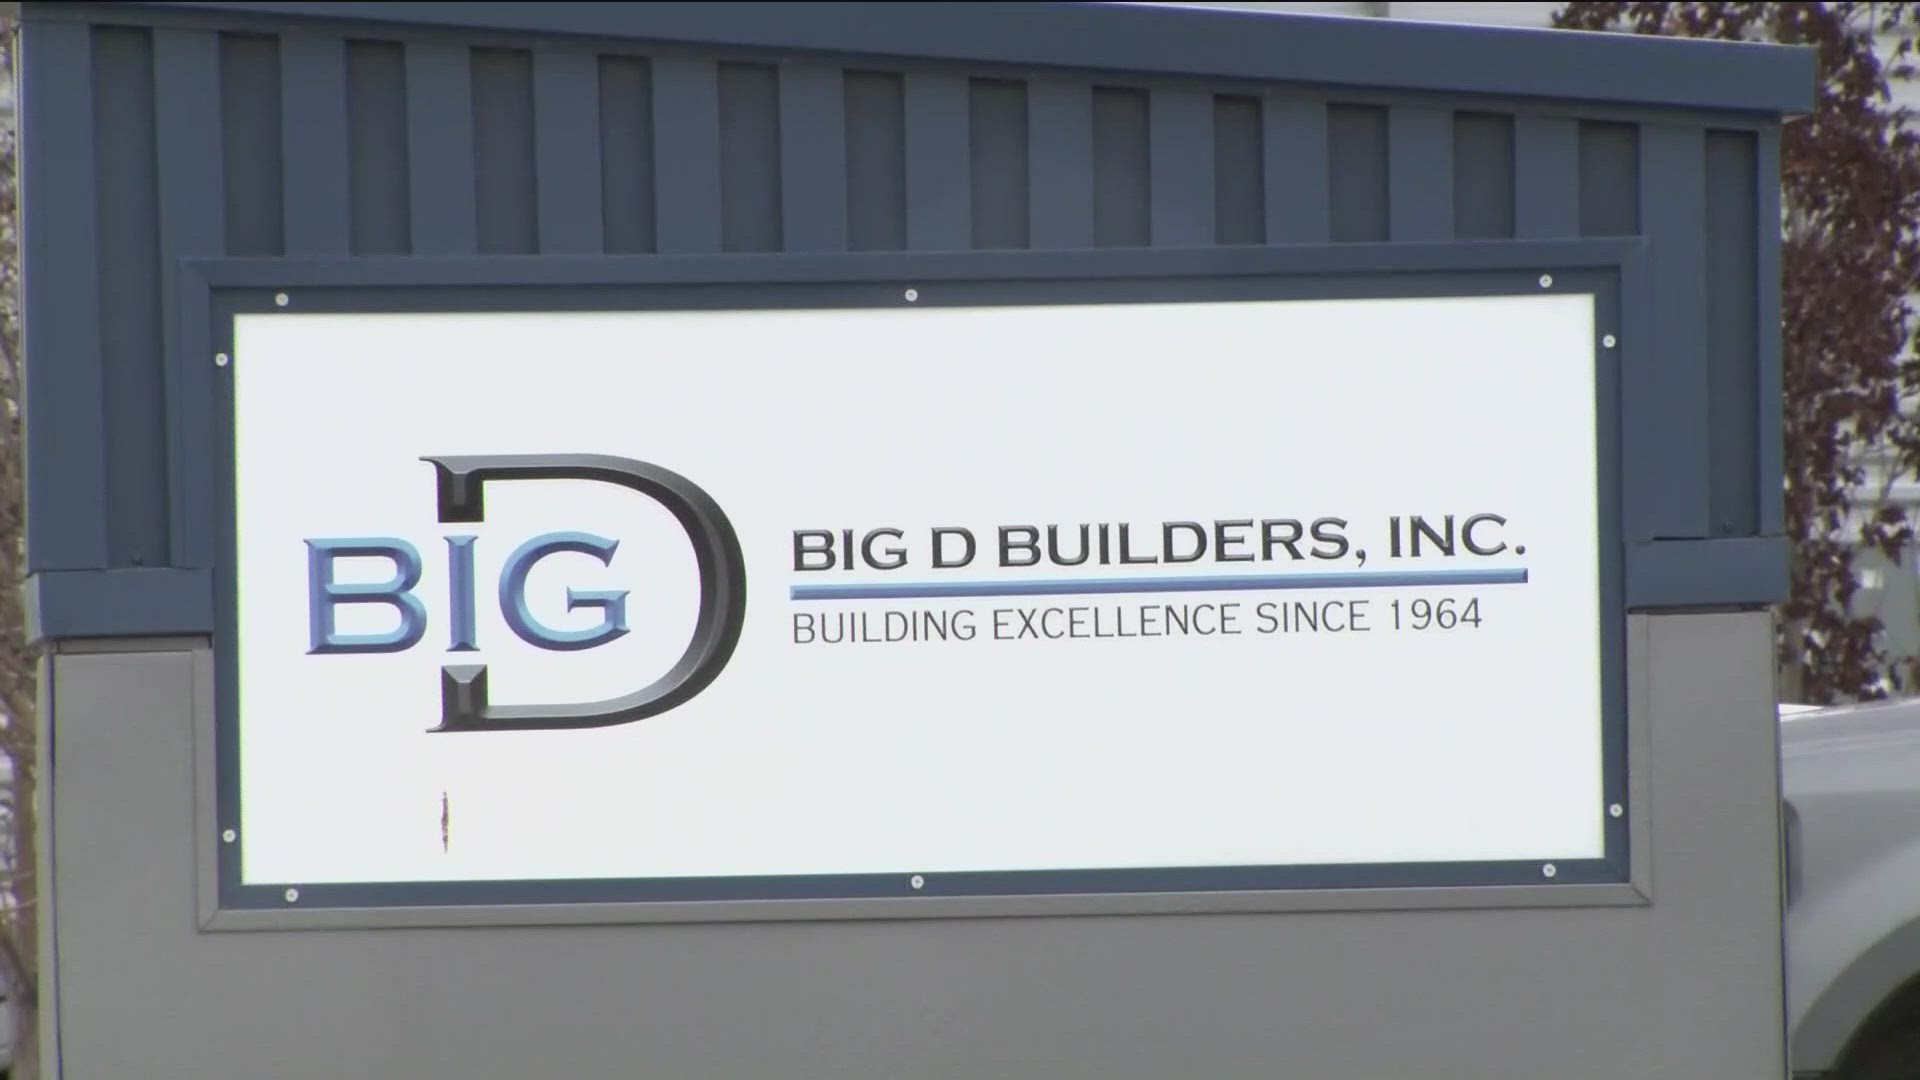 Big D Builders, Inc. has seven OHSA citations and has been fined tens of thousands of dollars over the past decade on projects across the Treasure Valley.